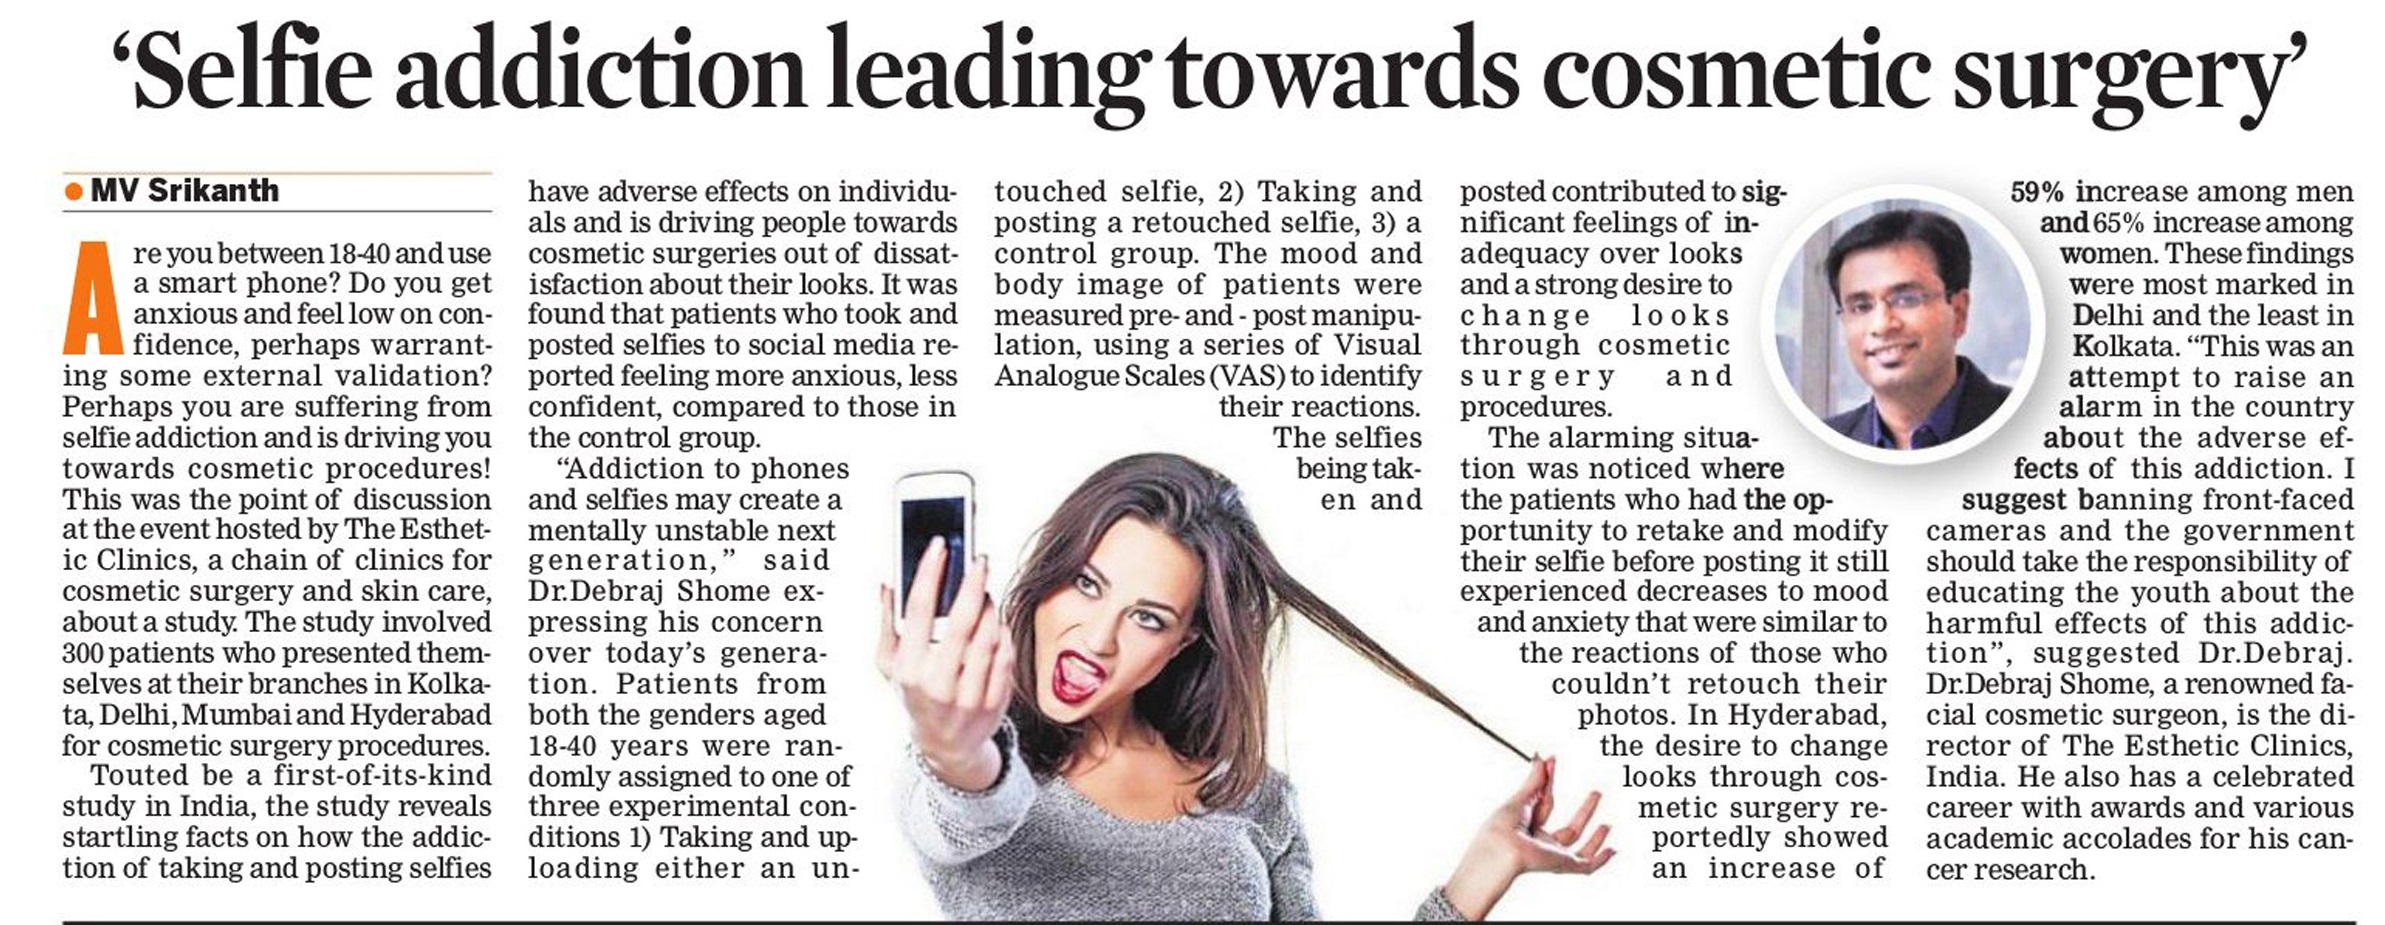 Selfie Addiction Leading Towards Cosmetic Surgery - The New Indian Express